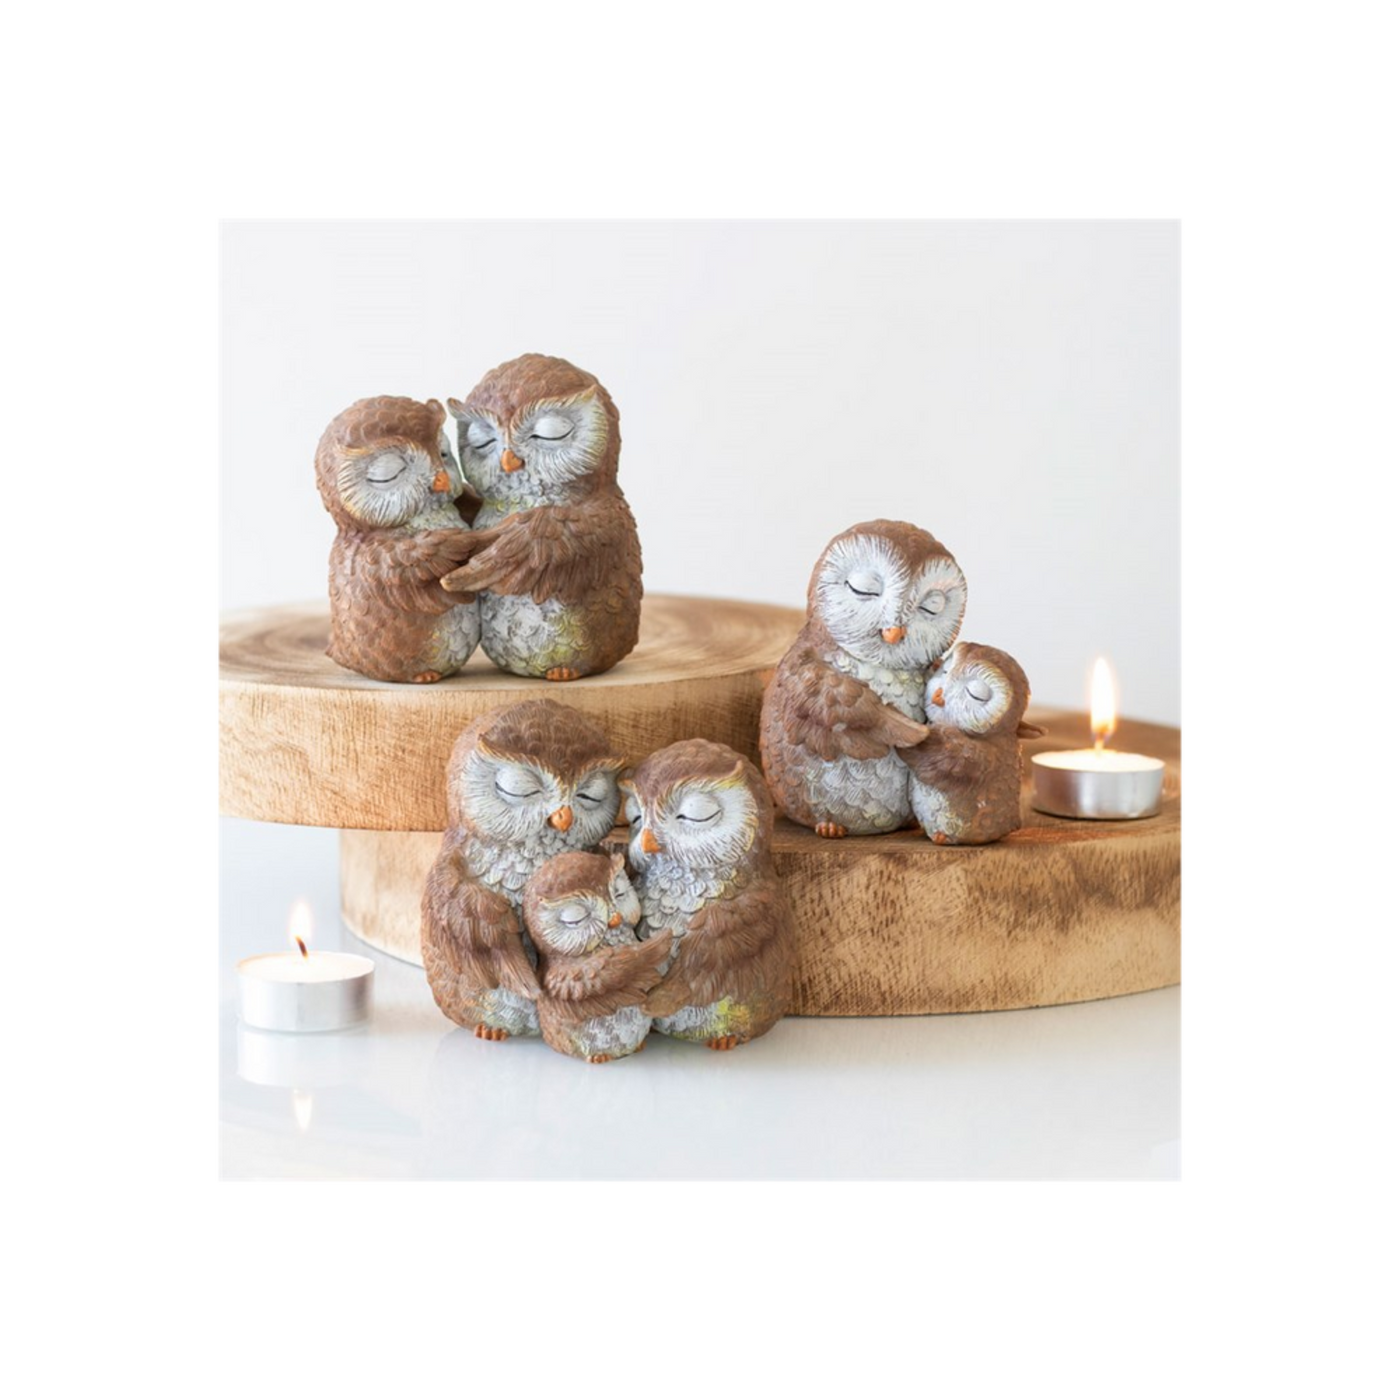 Owl Mother And Baby Decorative Home Ornament.